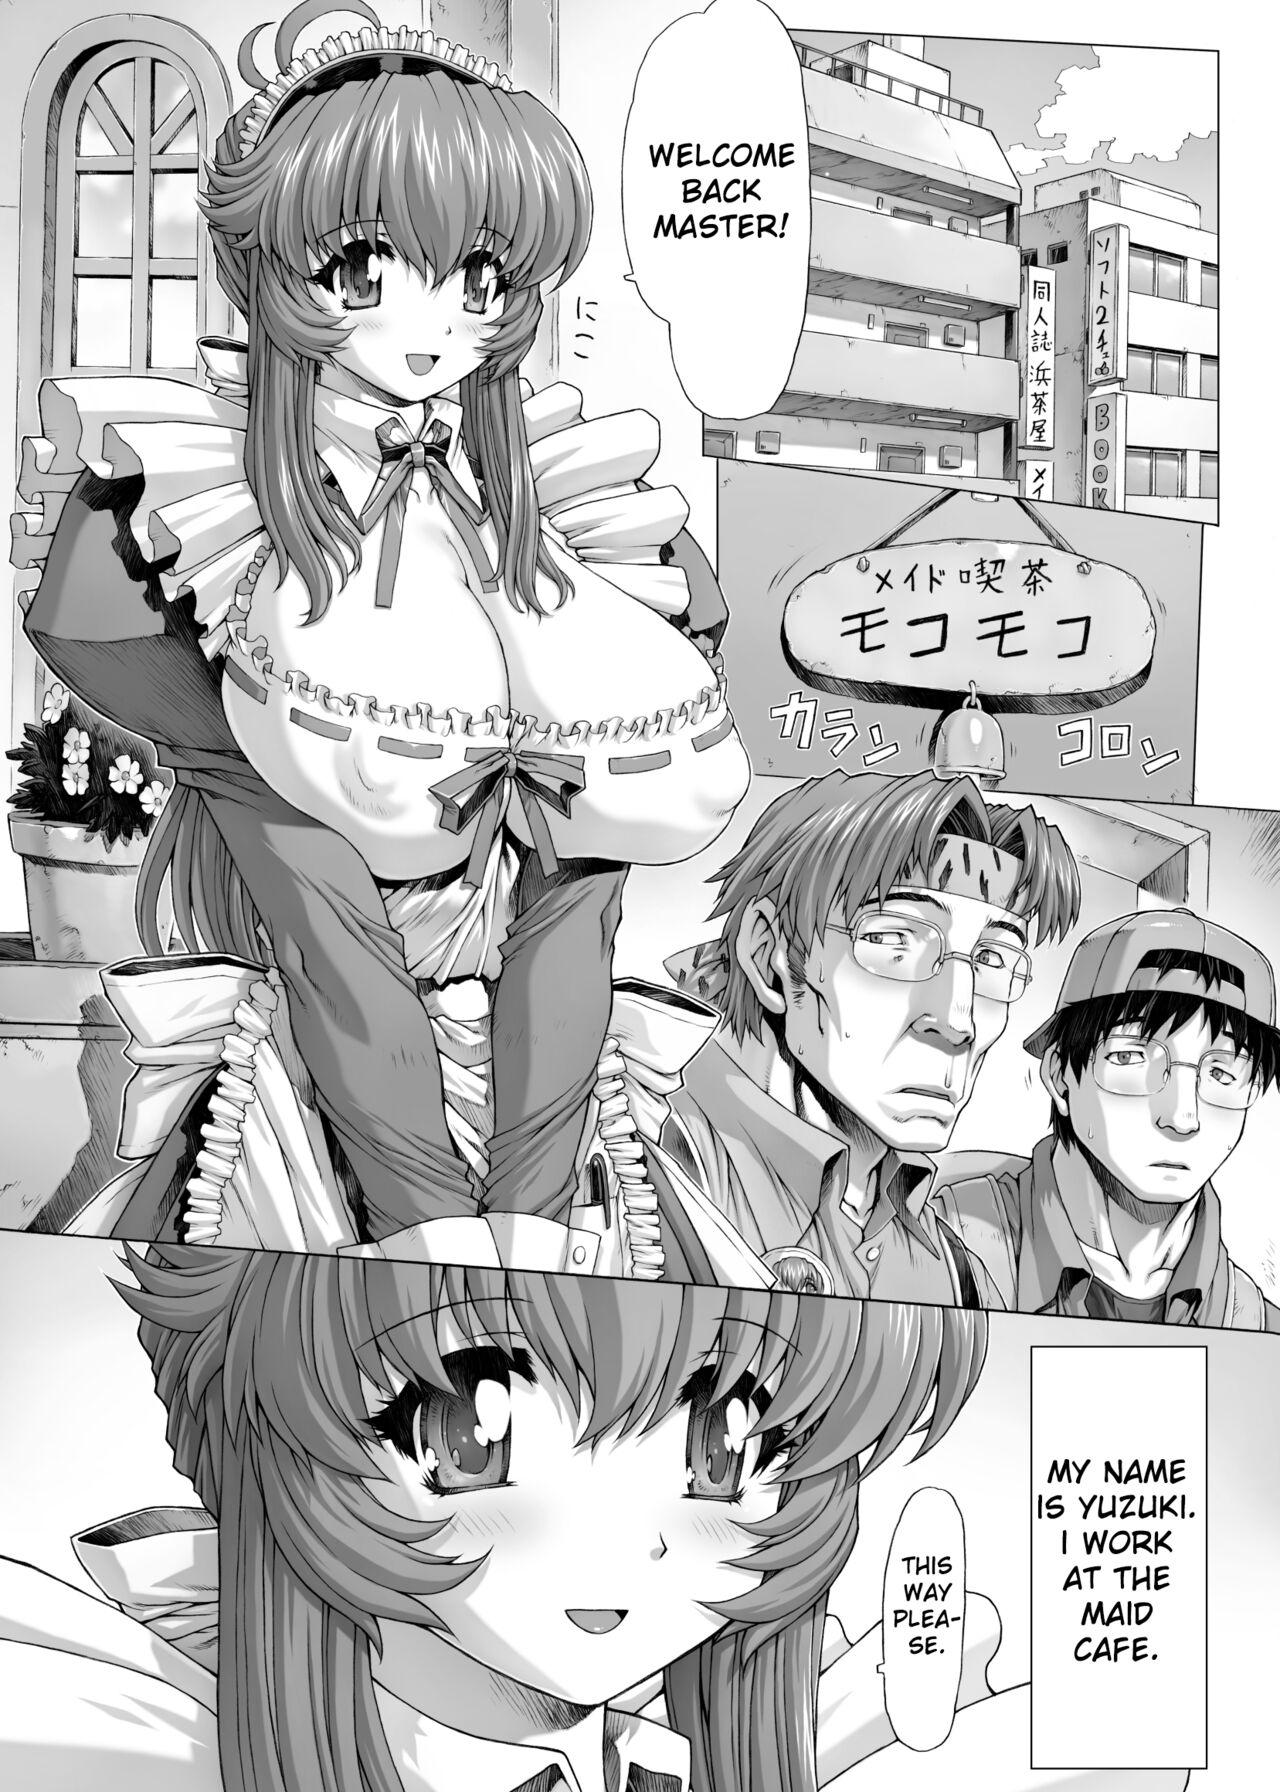 Action "Big Breasts Maid manga♥ Gilf - Picture 1